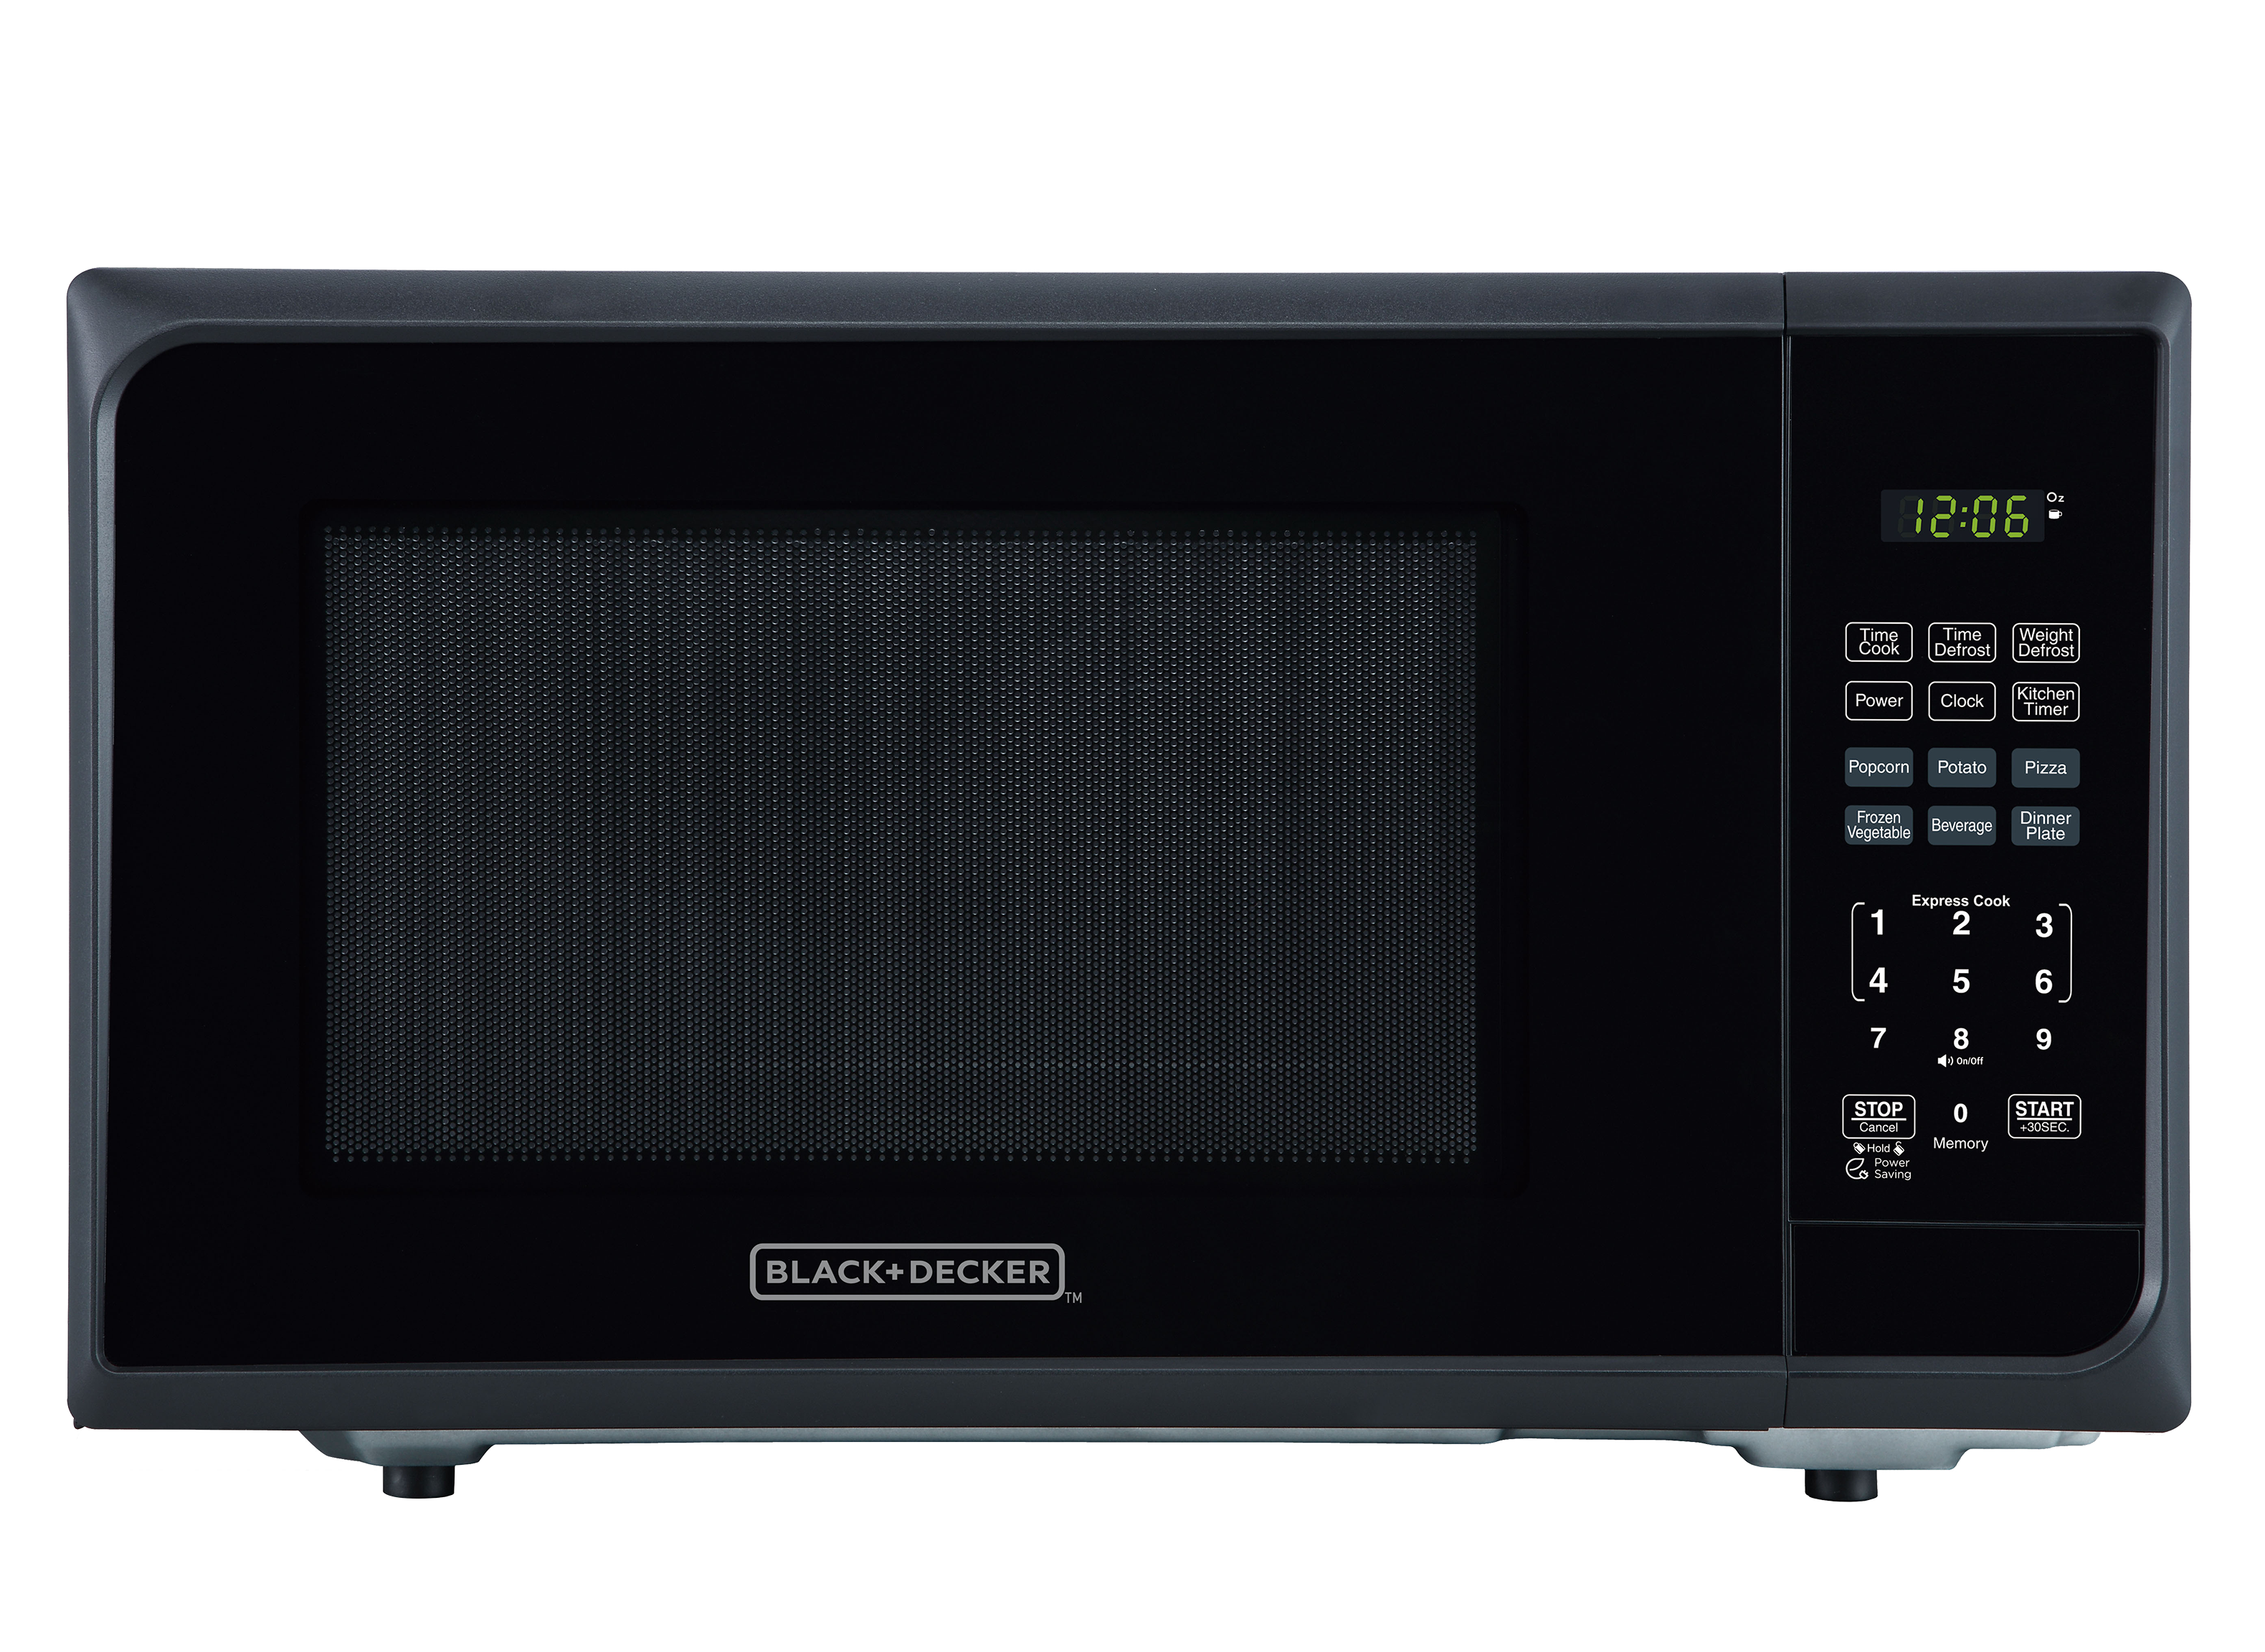 https://crdms.images.consumerreports.org/prod/products/cr/models/406708-midsized-countertop-microwaves-black-decker-em031m2ce-10029884.png